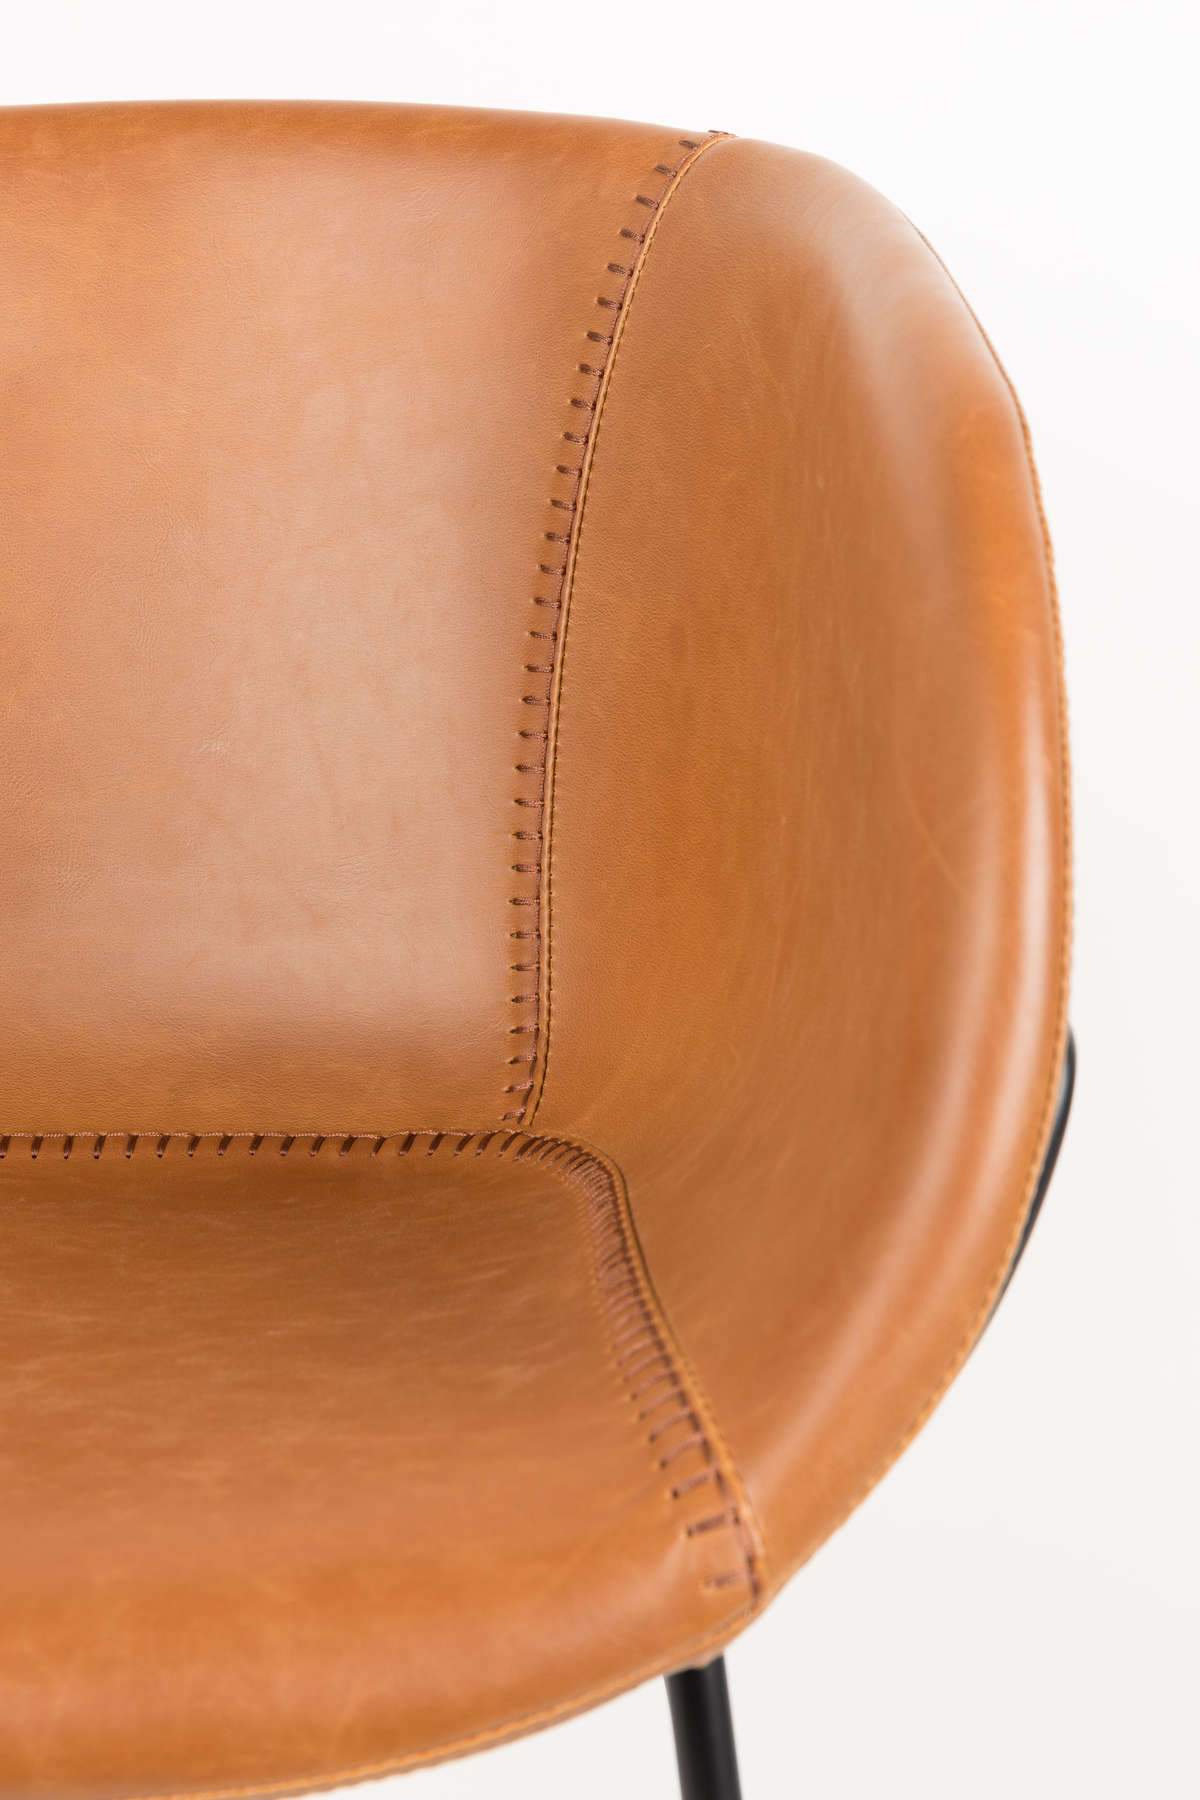 FESTON ecological leather armchair brown